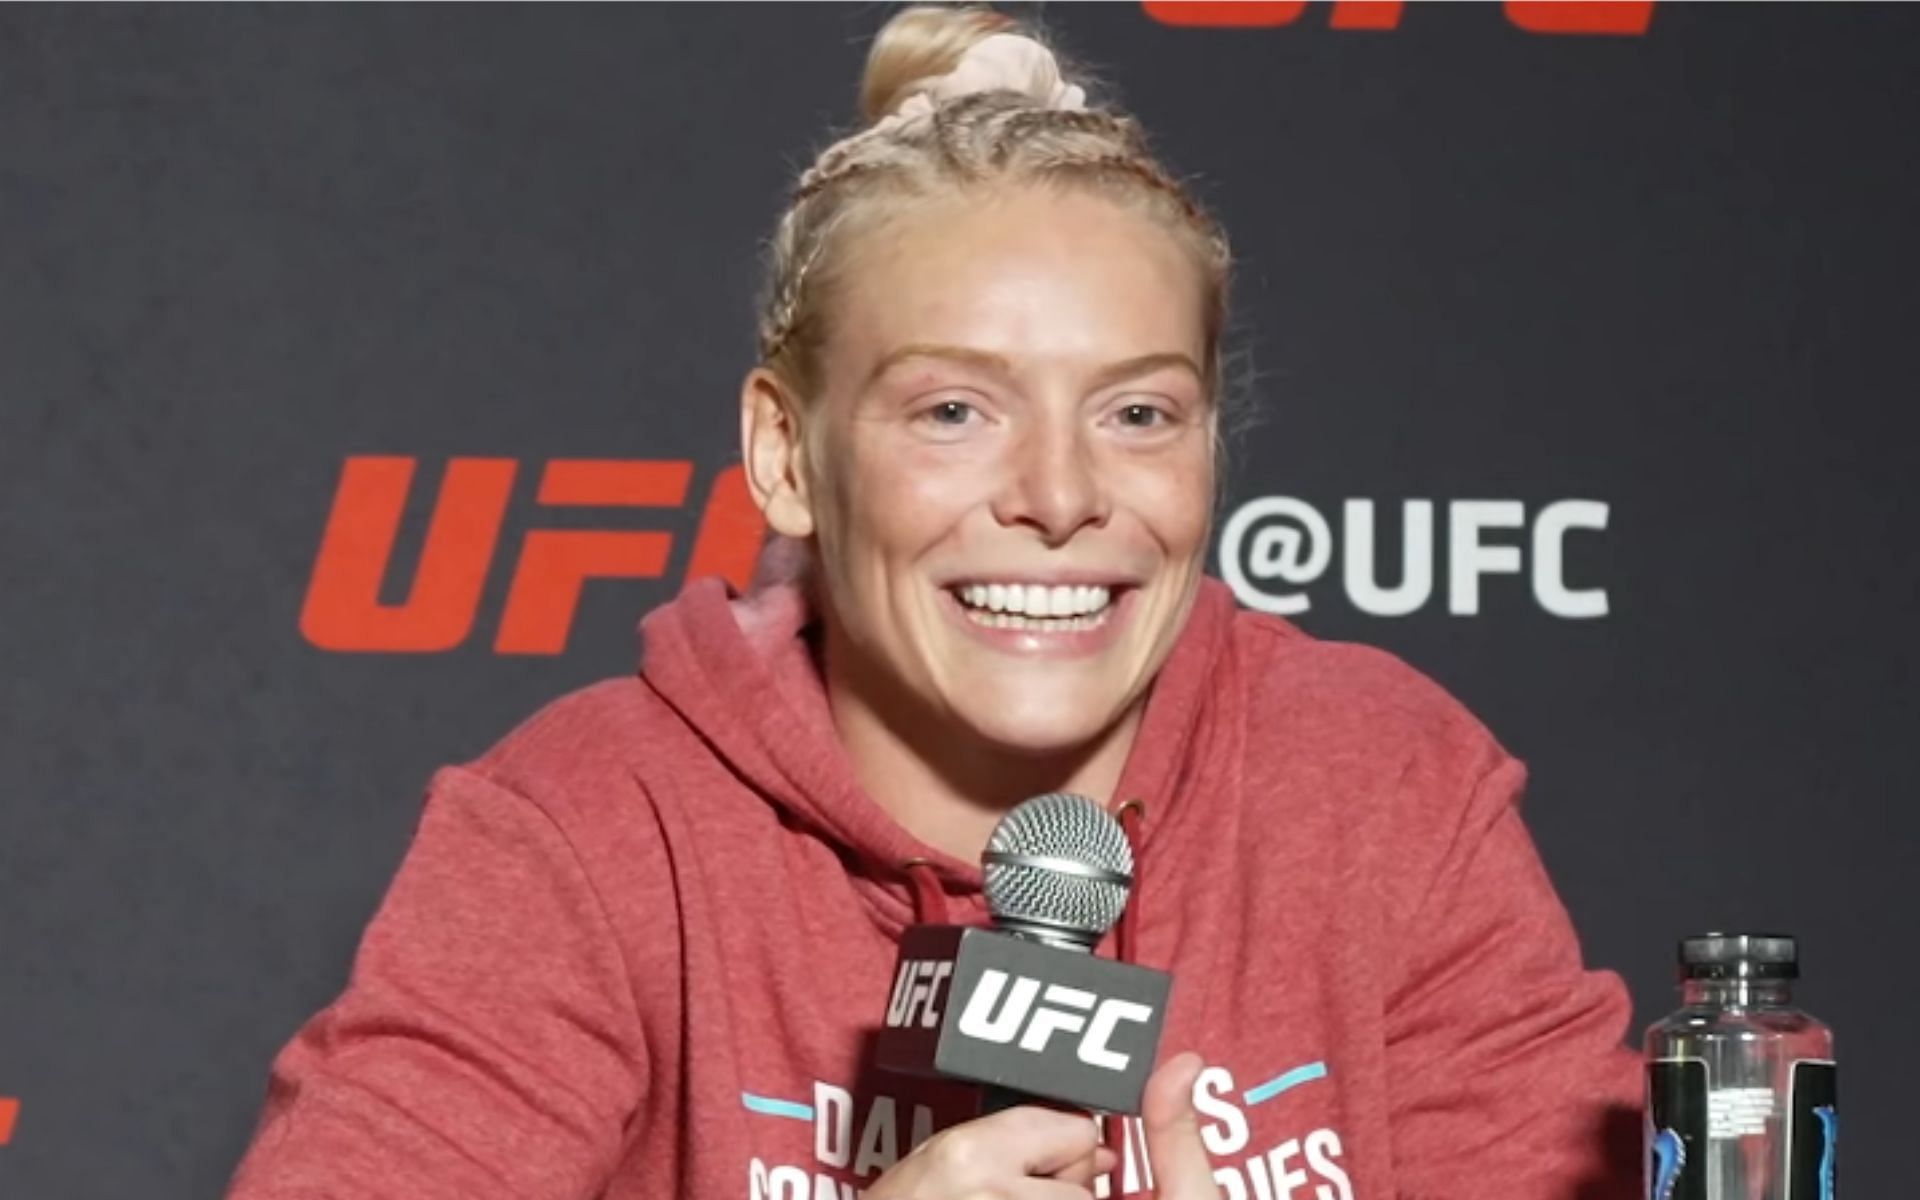 Hailey Cowan set to make her UFC debut (Photo credit: MMA Junkie - YouTube)